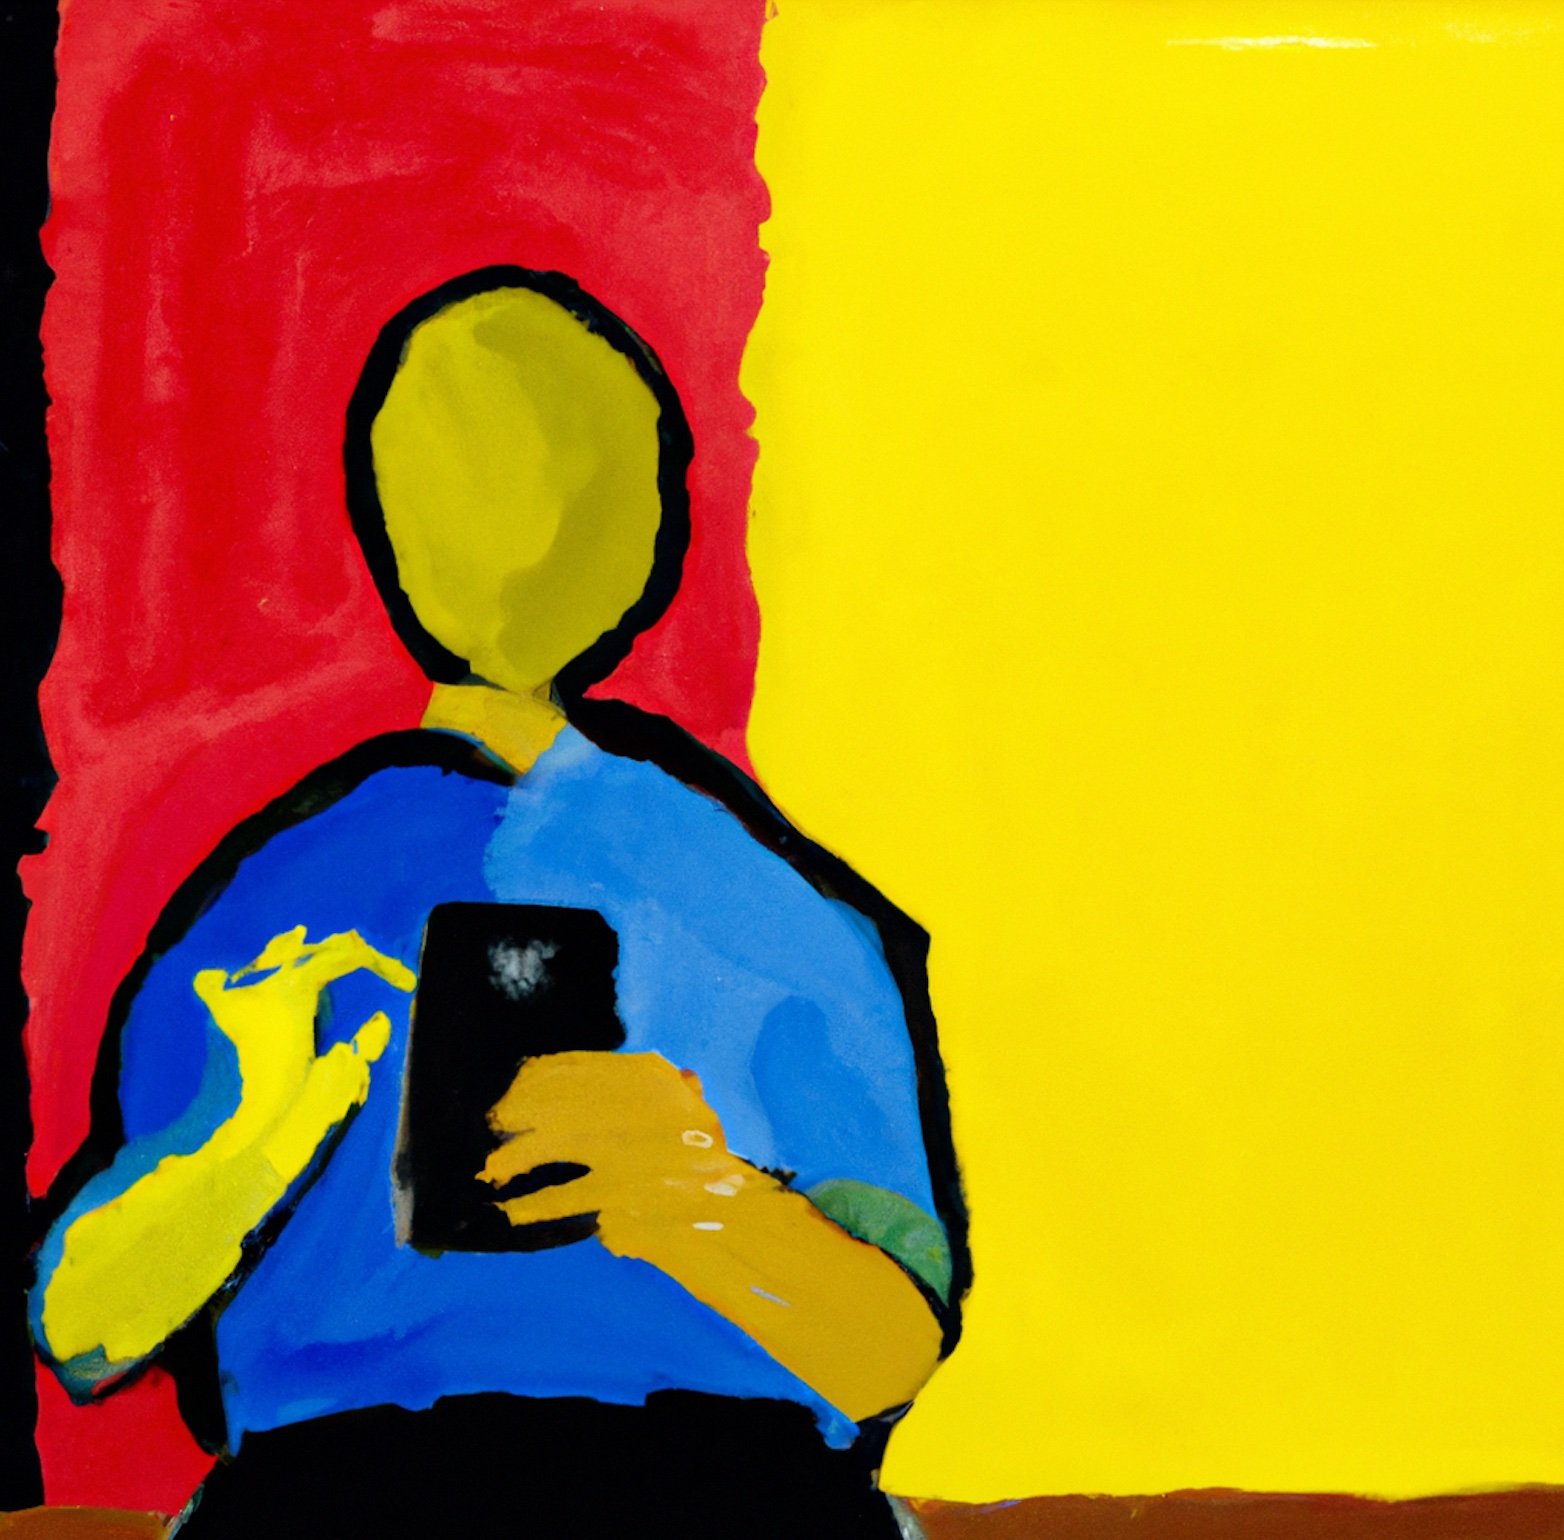 An oil painting by Matisse of a person on their smartphone with a belgian flag in the background (generated by DALL-E)